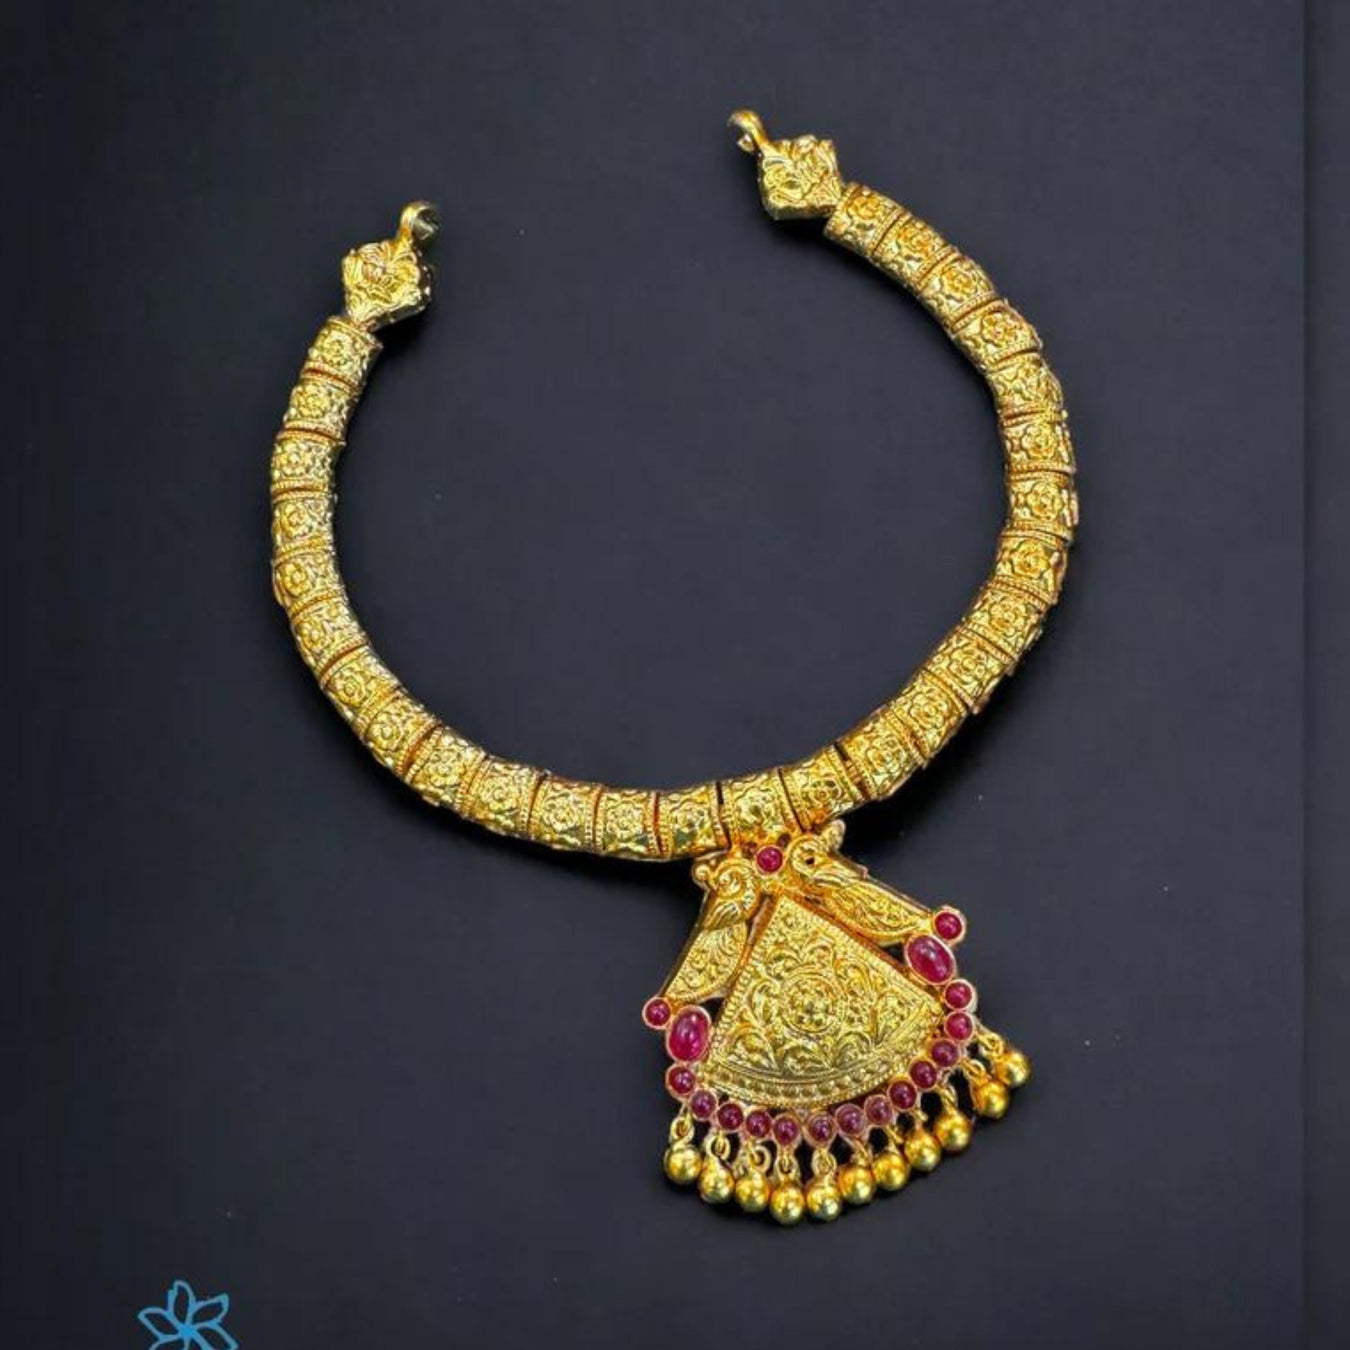 Swarna - Gold Dipped Silver Jewellery